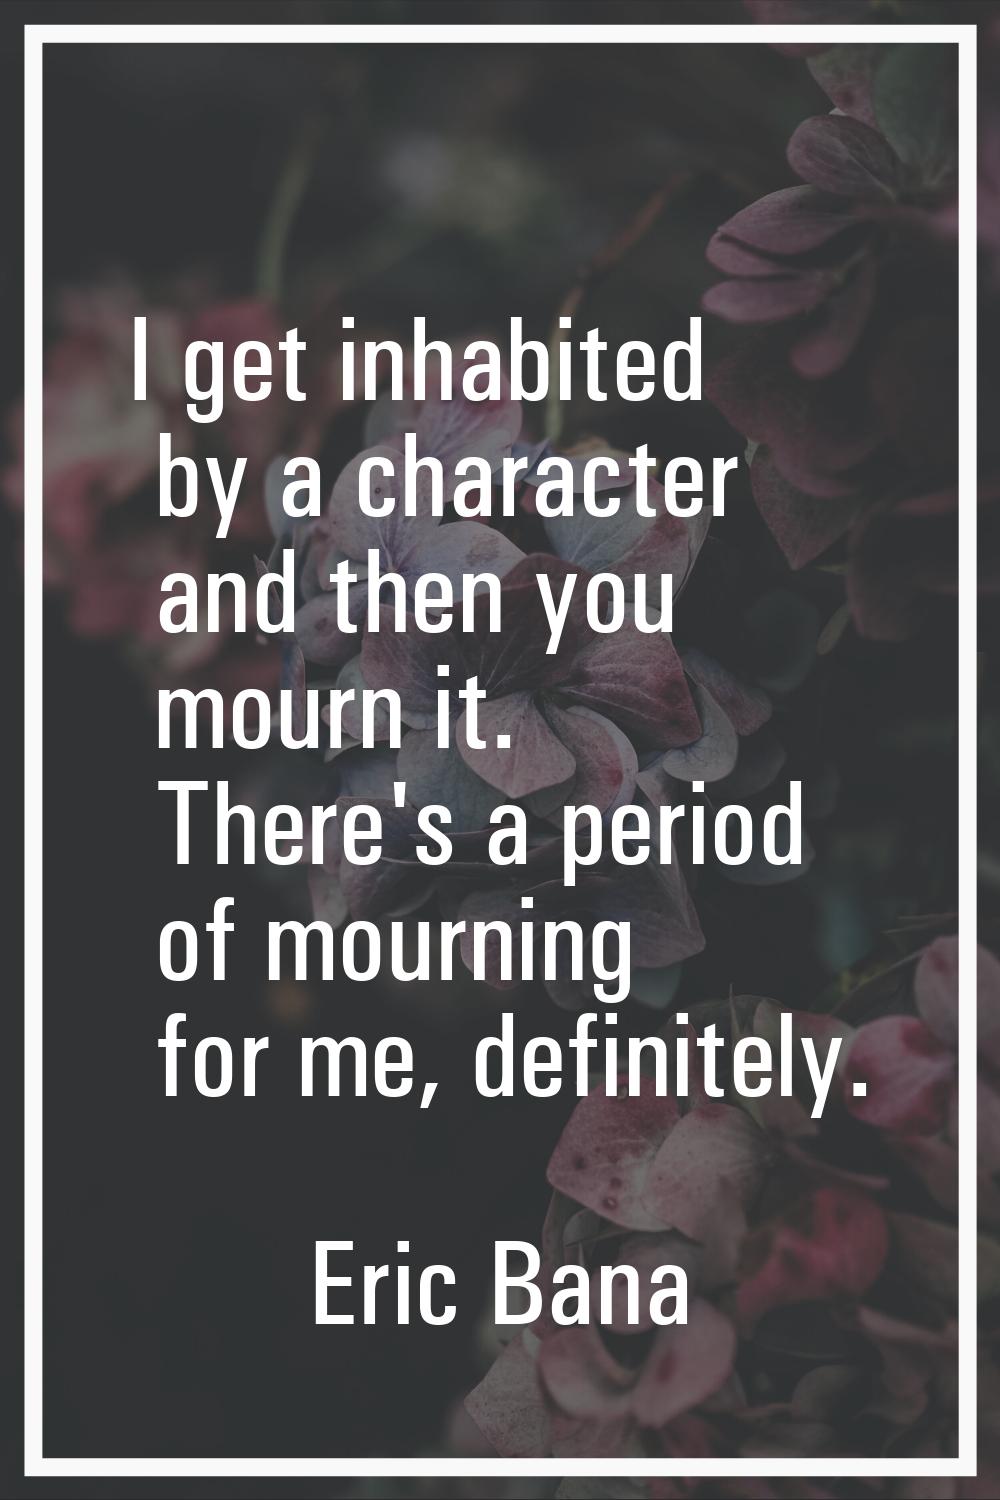 I get inhabited by a character and then you mourn it. There's a period of mourning for me, definite